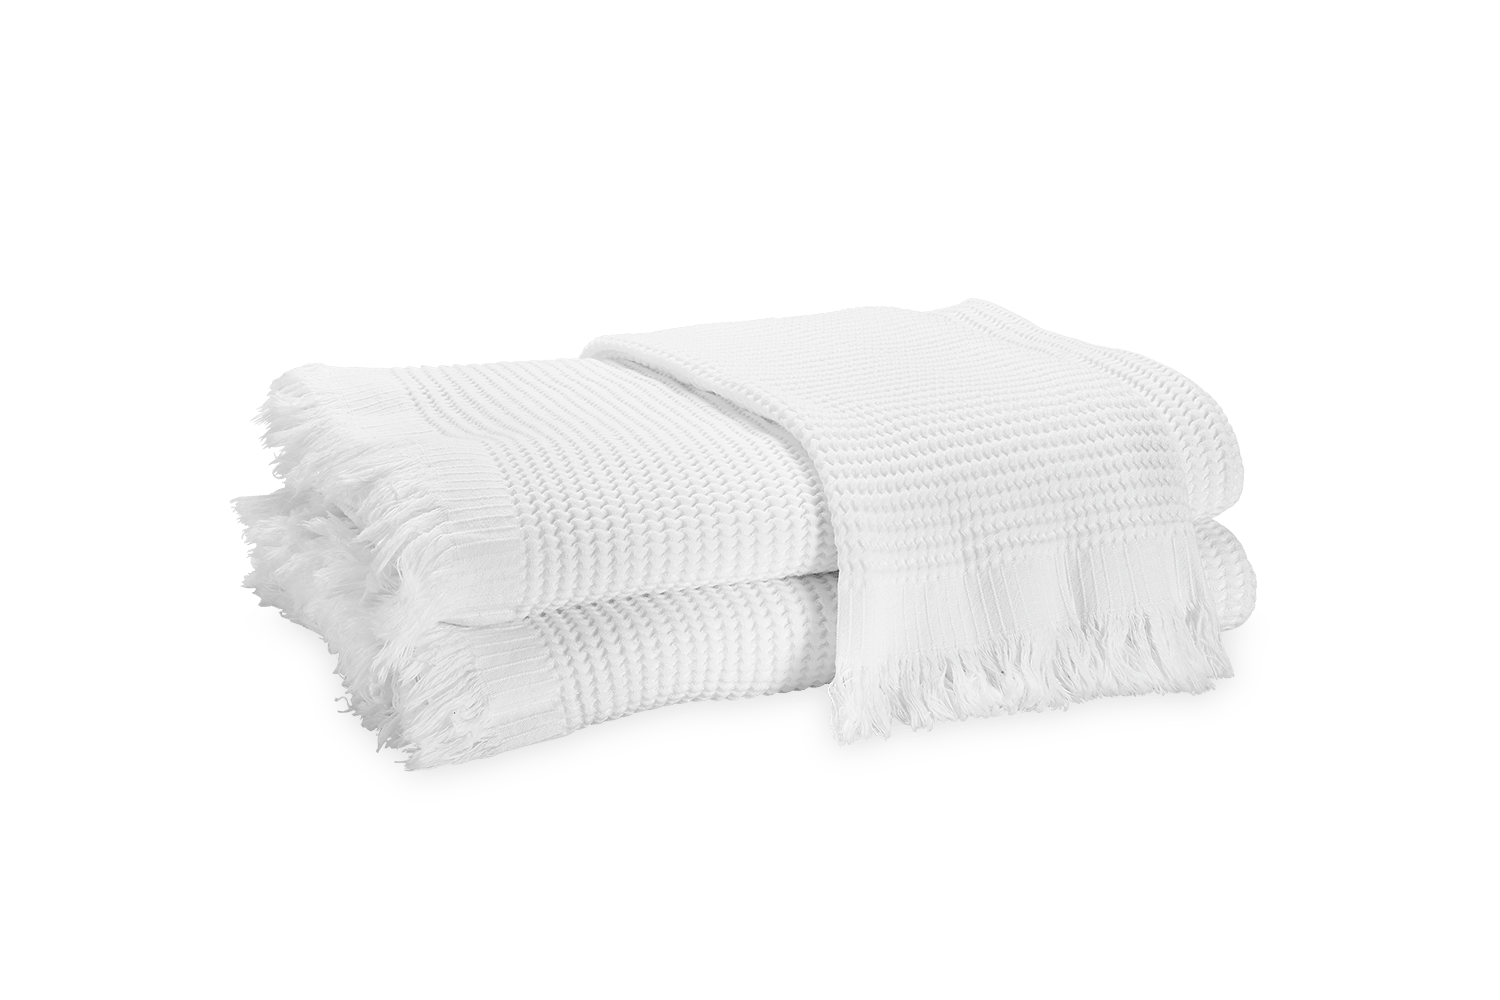 https://cdn.shopify.com/s/files/1/0318/5423/1691/products/kiran-towels-white-primary.png?v=1683625063&width=1500